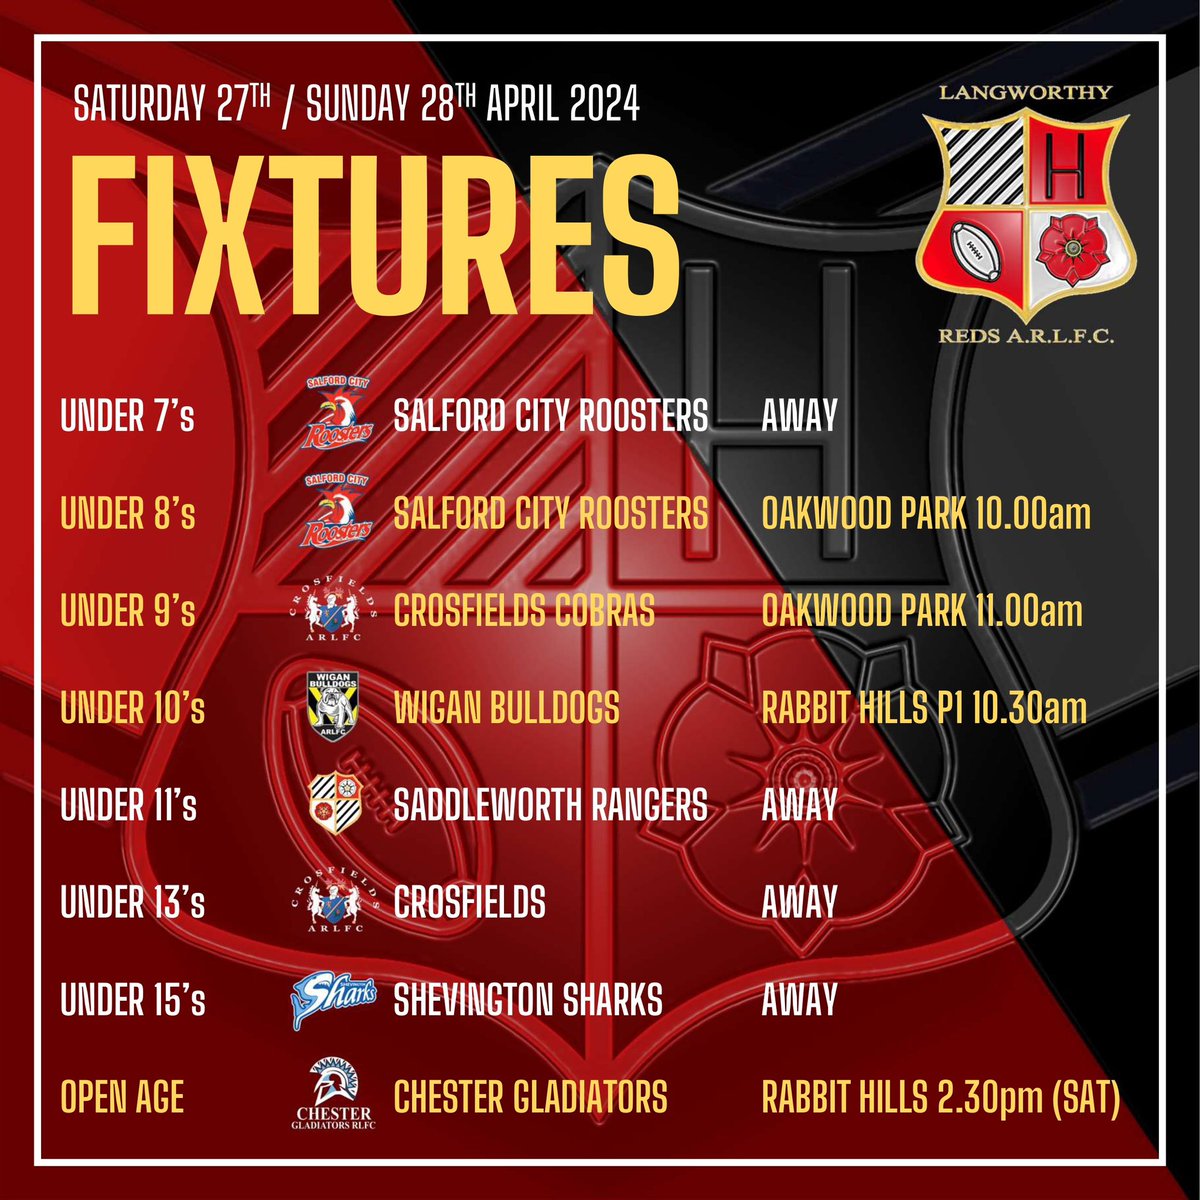 All our teams are in action this weekend coming with 4 at home and 4 away. The Under 13’s game at Crosfields is a league and Lancashire Cup 2nd round double header. It’s also another home game for the Open Age on Saturday as we host Chester Gladiators. Good luck to all teams!